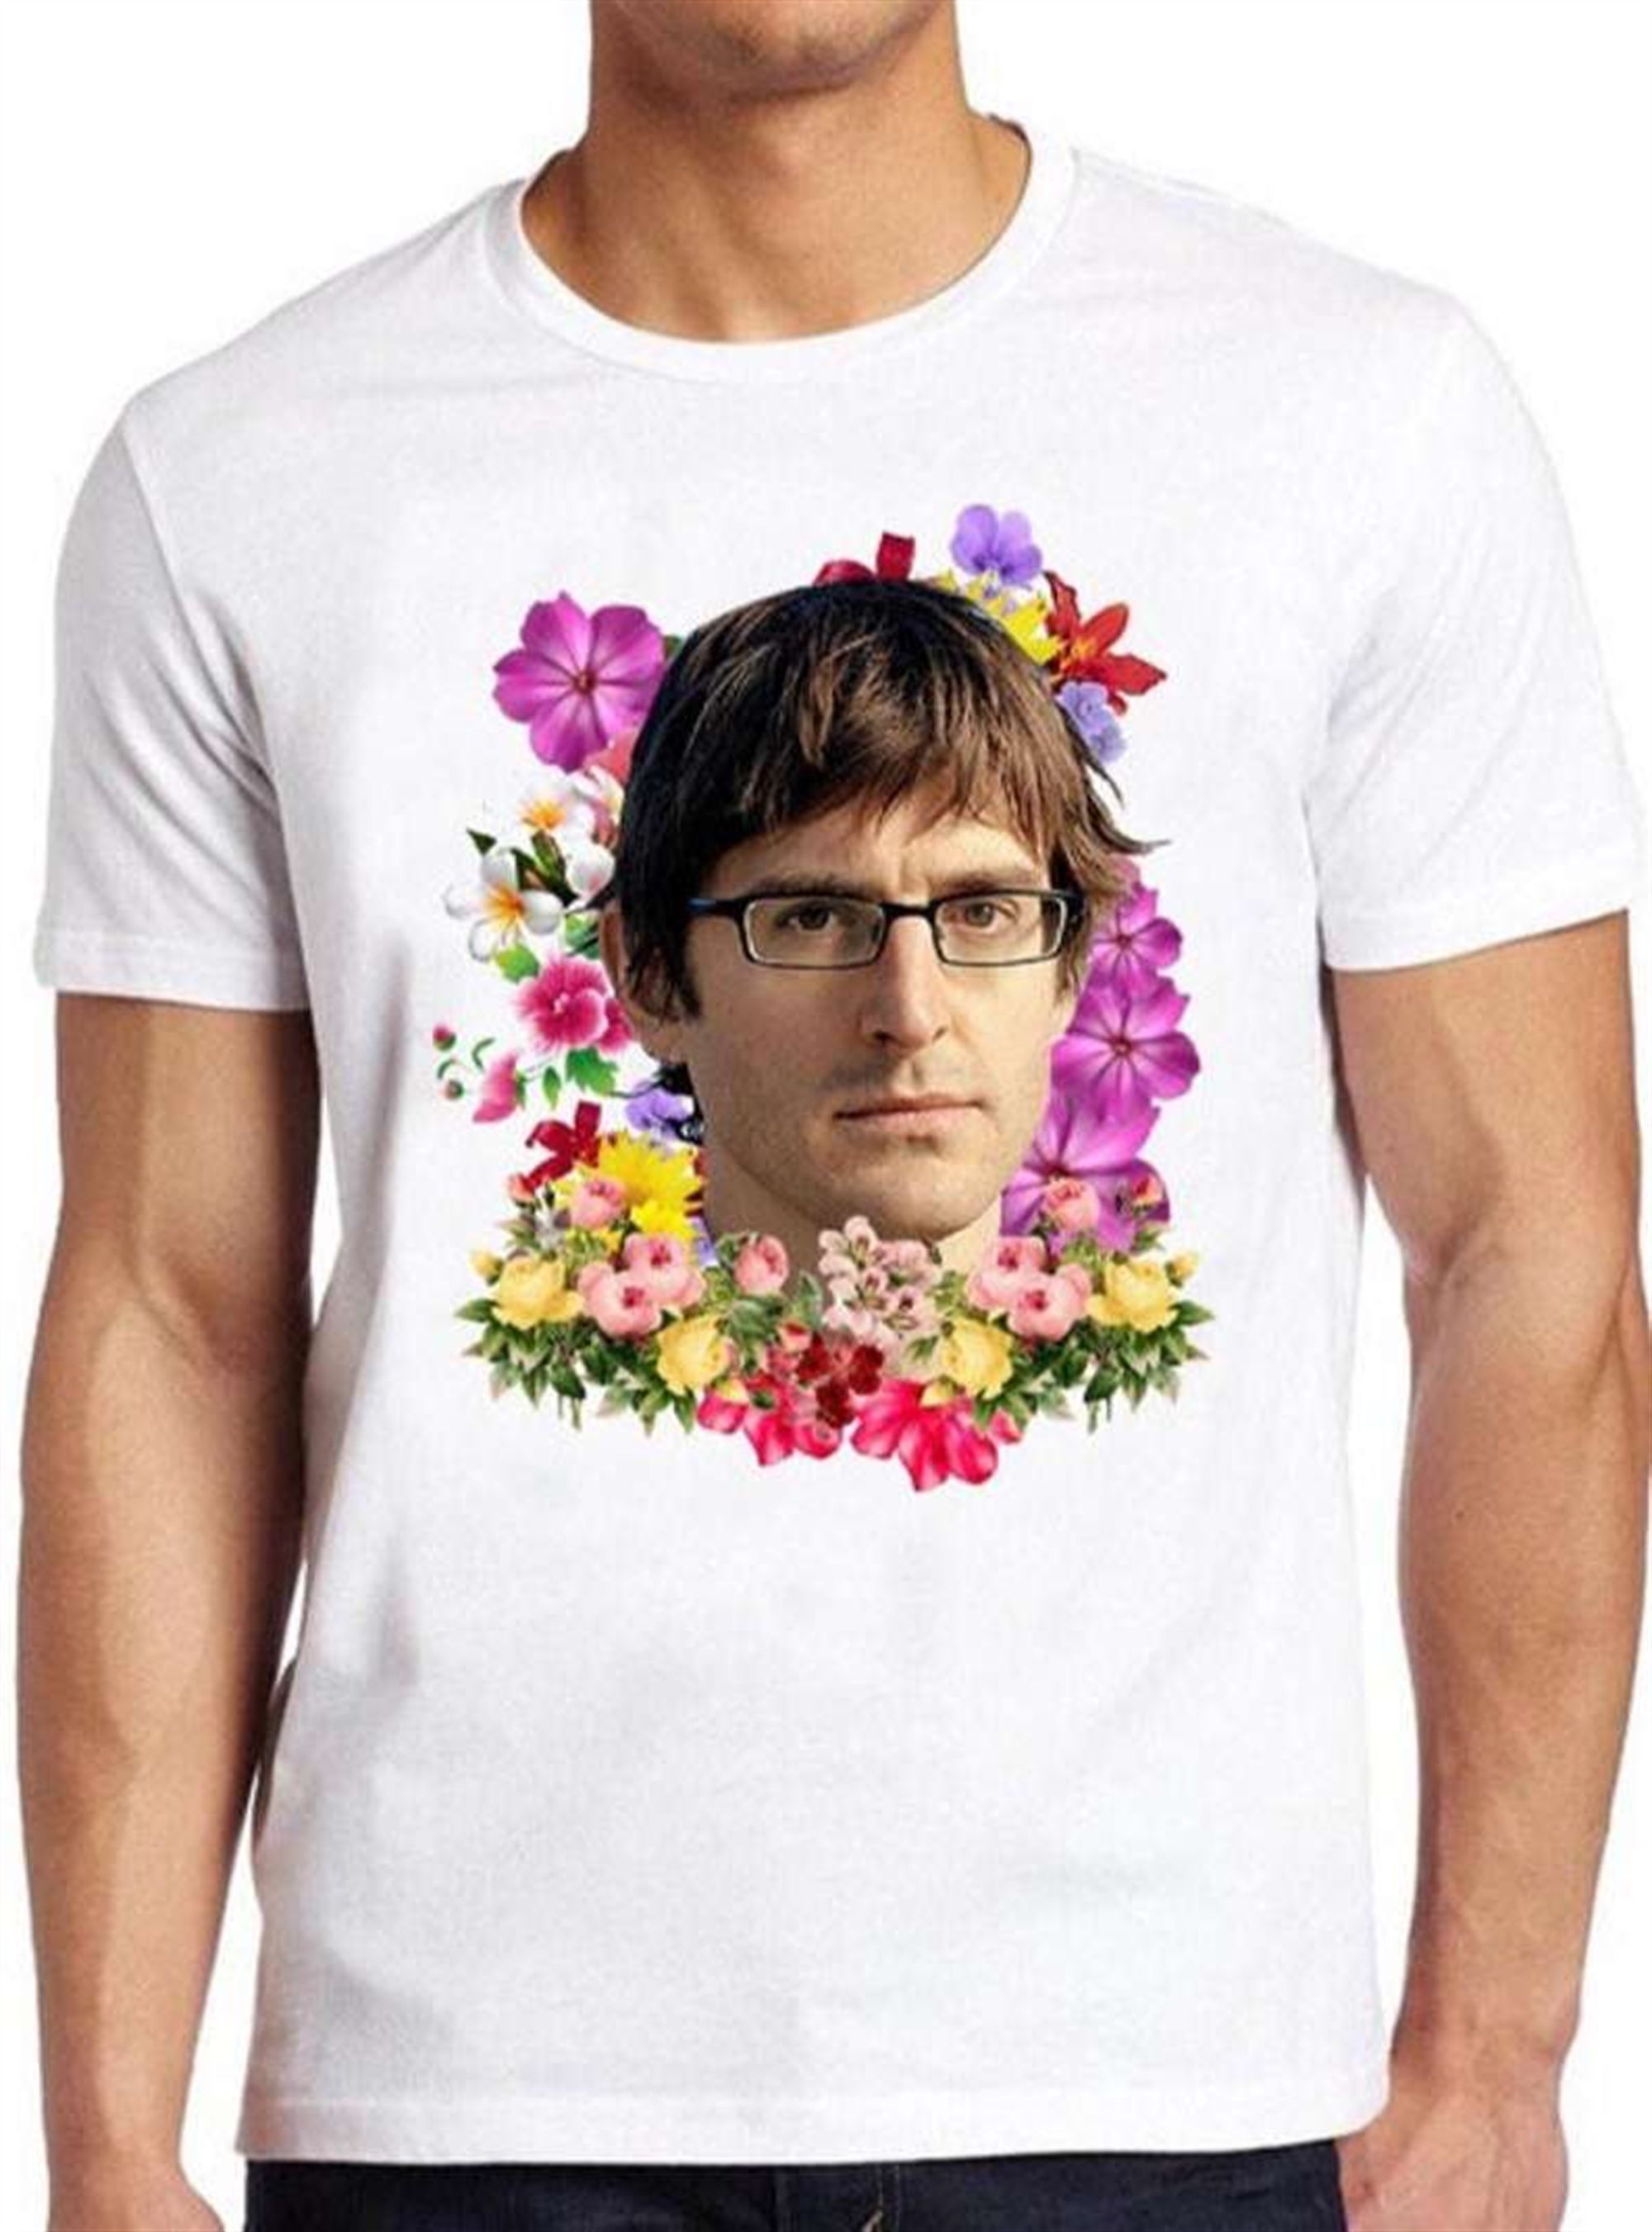 Louis Theroux T Shirt Documentary Filmmaker I Gotta Get Full Size Up To 5xl